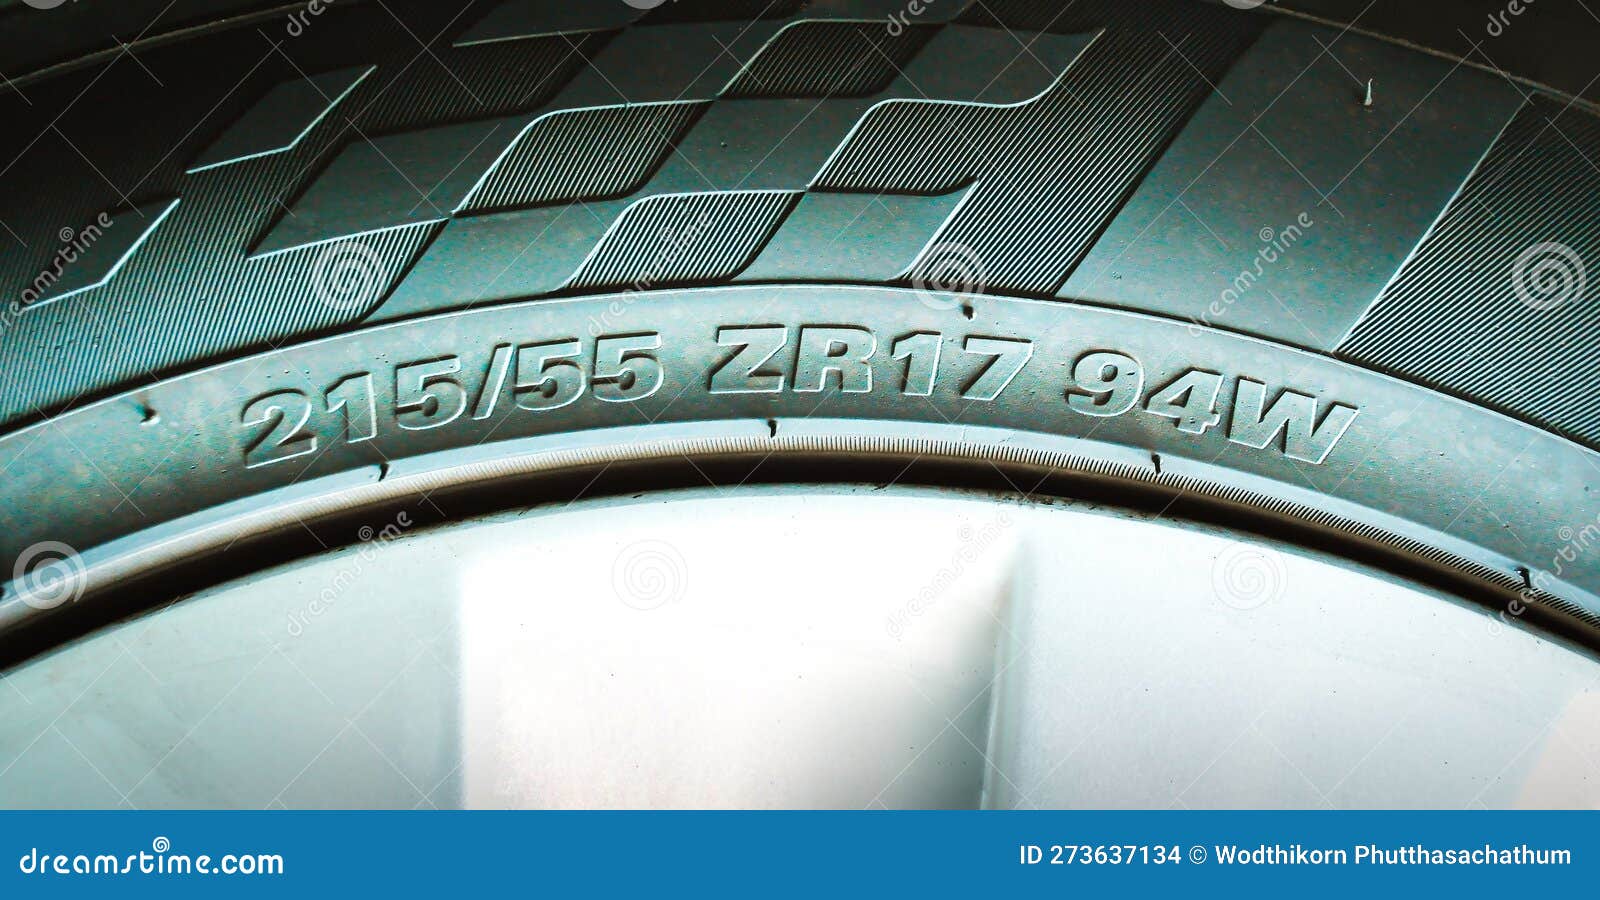 numbers and characters on the sidewall of a car tire